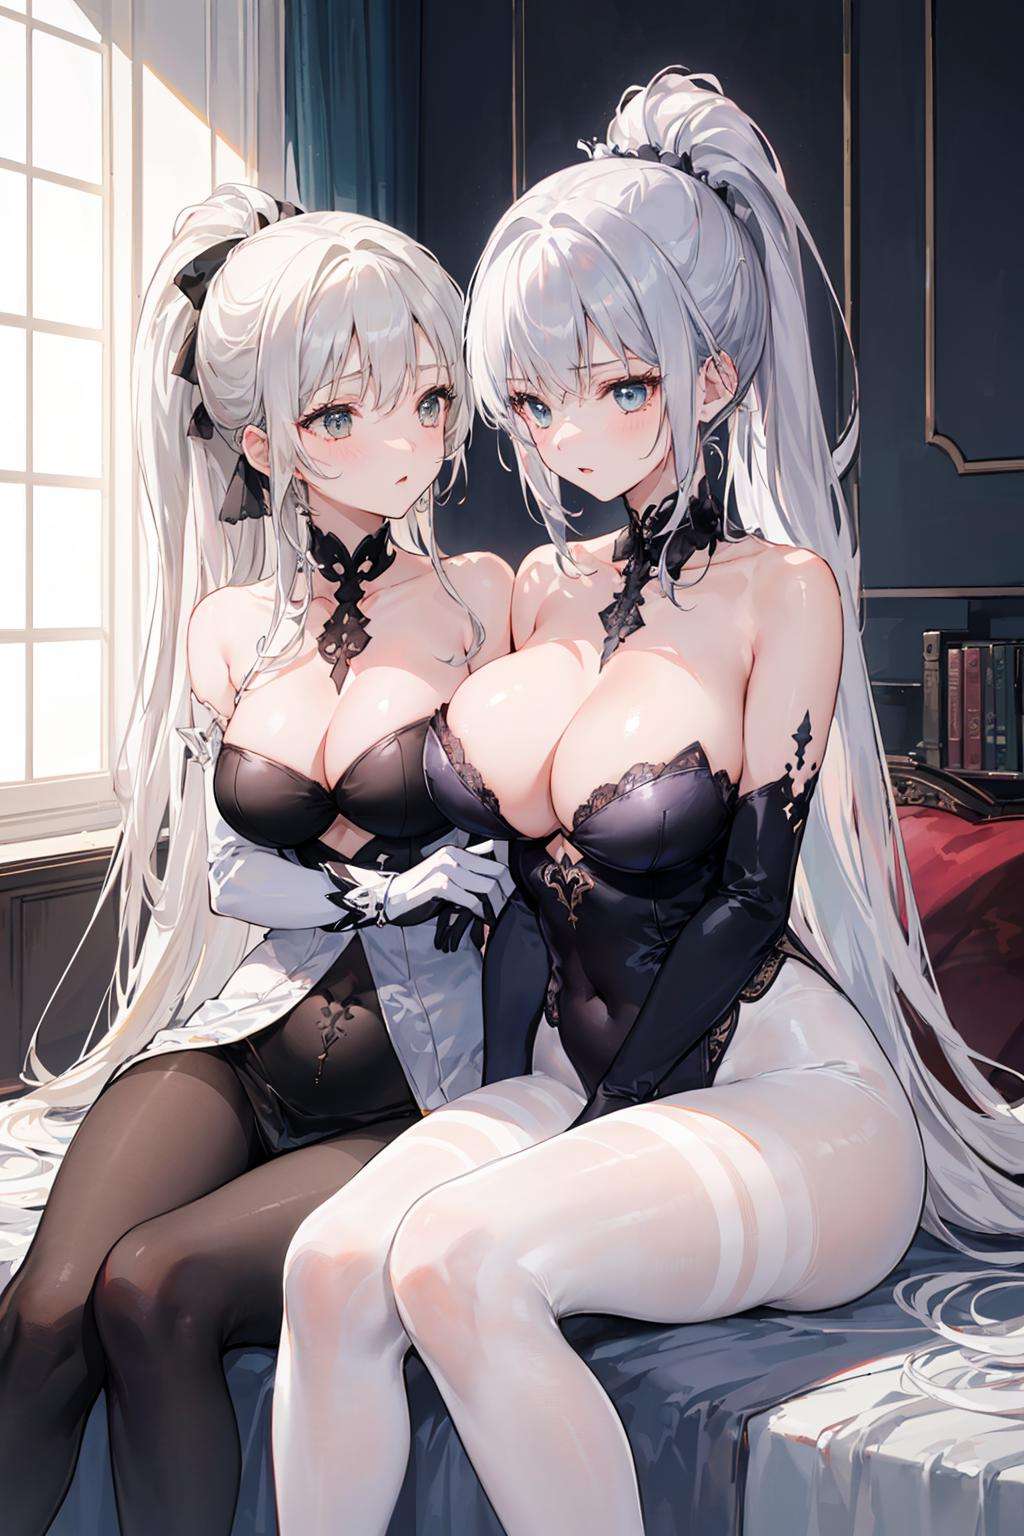 (((2 girls))),ray tracing, (dim light), [realistic] ((detailed background (bedroom))),(((silver hair)), (((A long disheveled silver-haired, busty yet slender girls with a high ponytail))) are  in the ominous bedroom, averting their blonde eyes, ((and the girls wear intricate embroidered black high slit cheongsams with pantyhose and white fur trim elbow gloves)), as the girls sitting in quite intimate contact each other to show off their delicate svelte figures and lissome curvaceous beauties,correct limbs